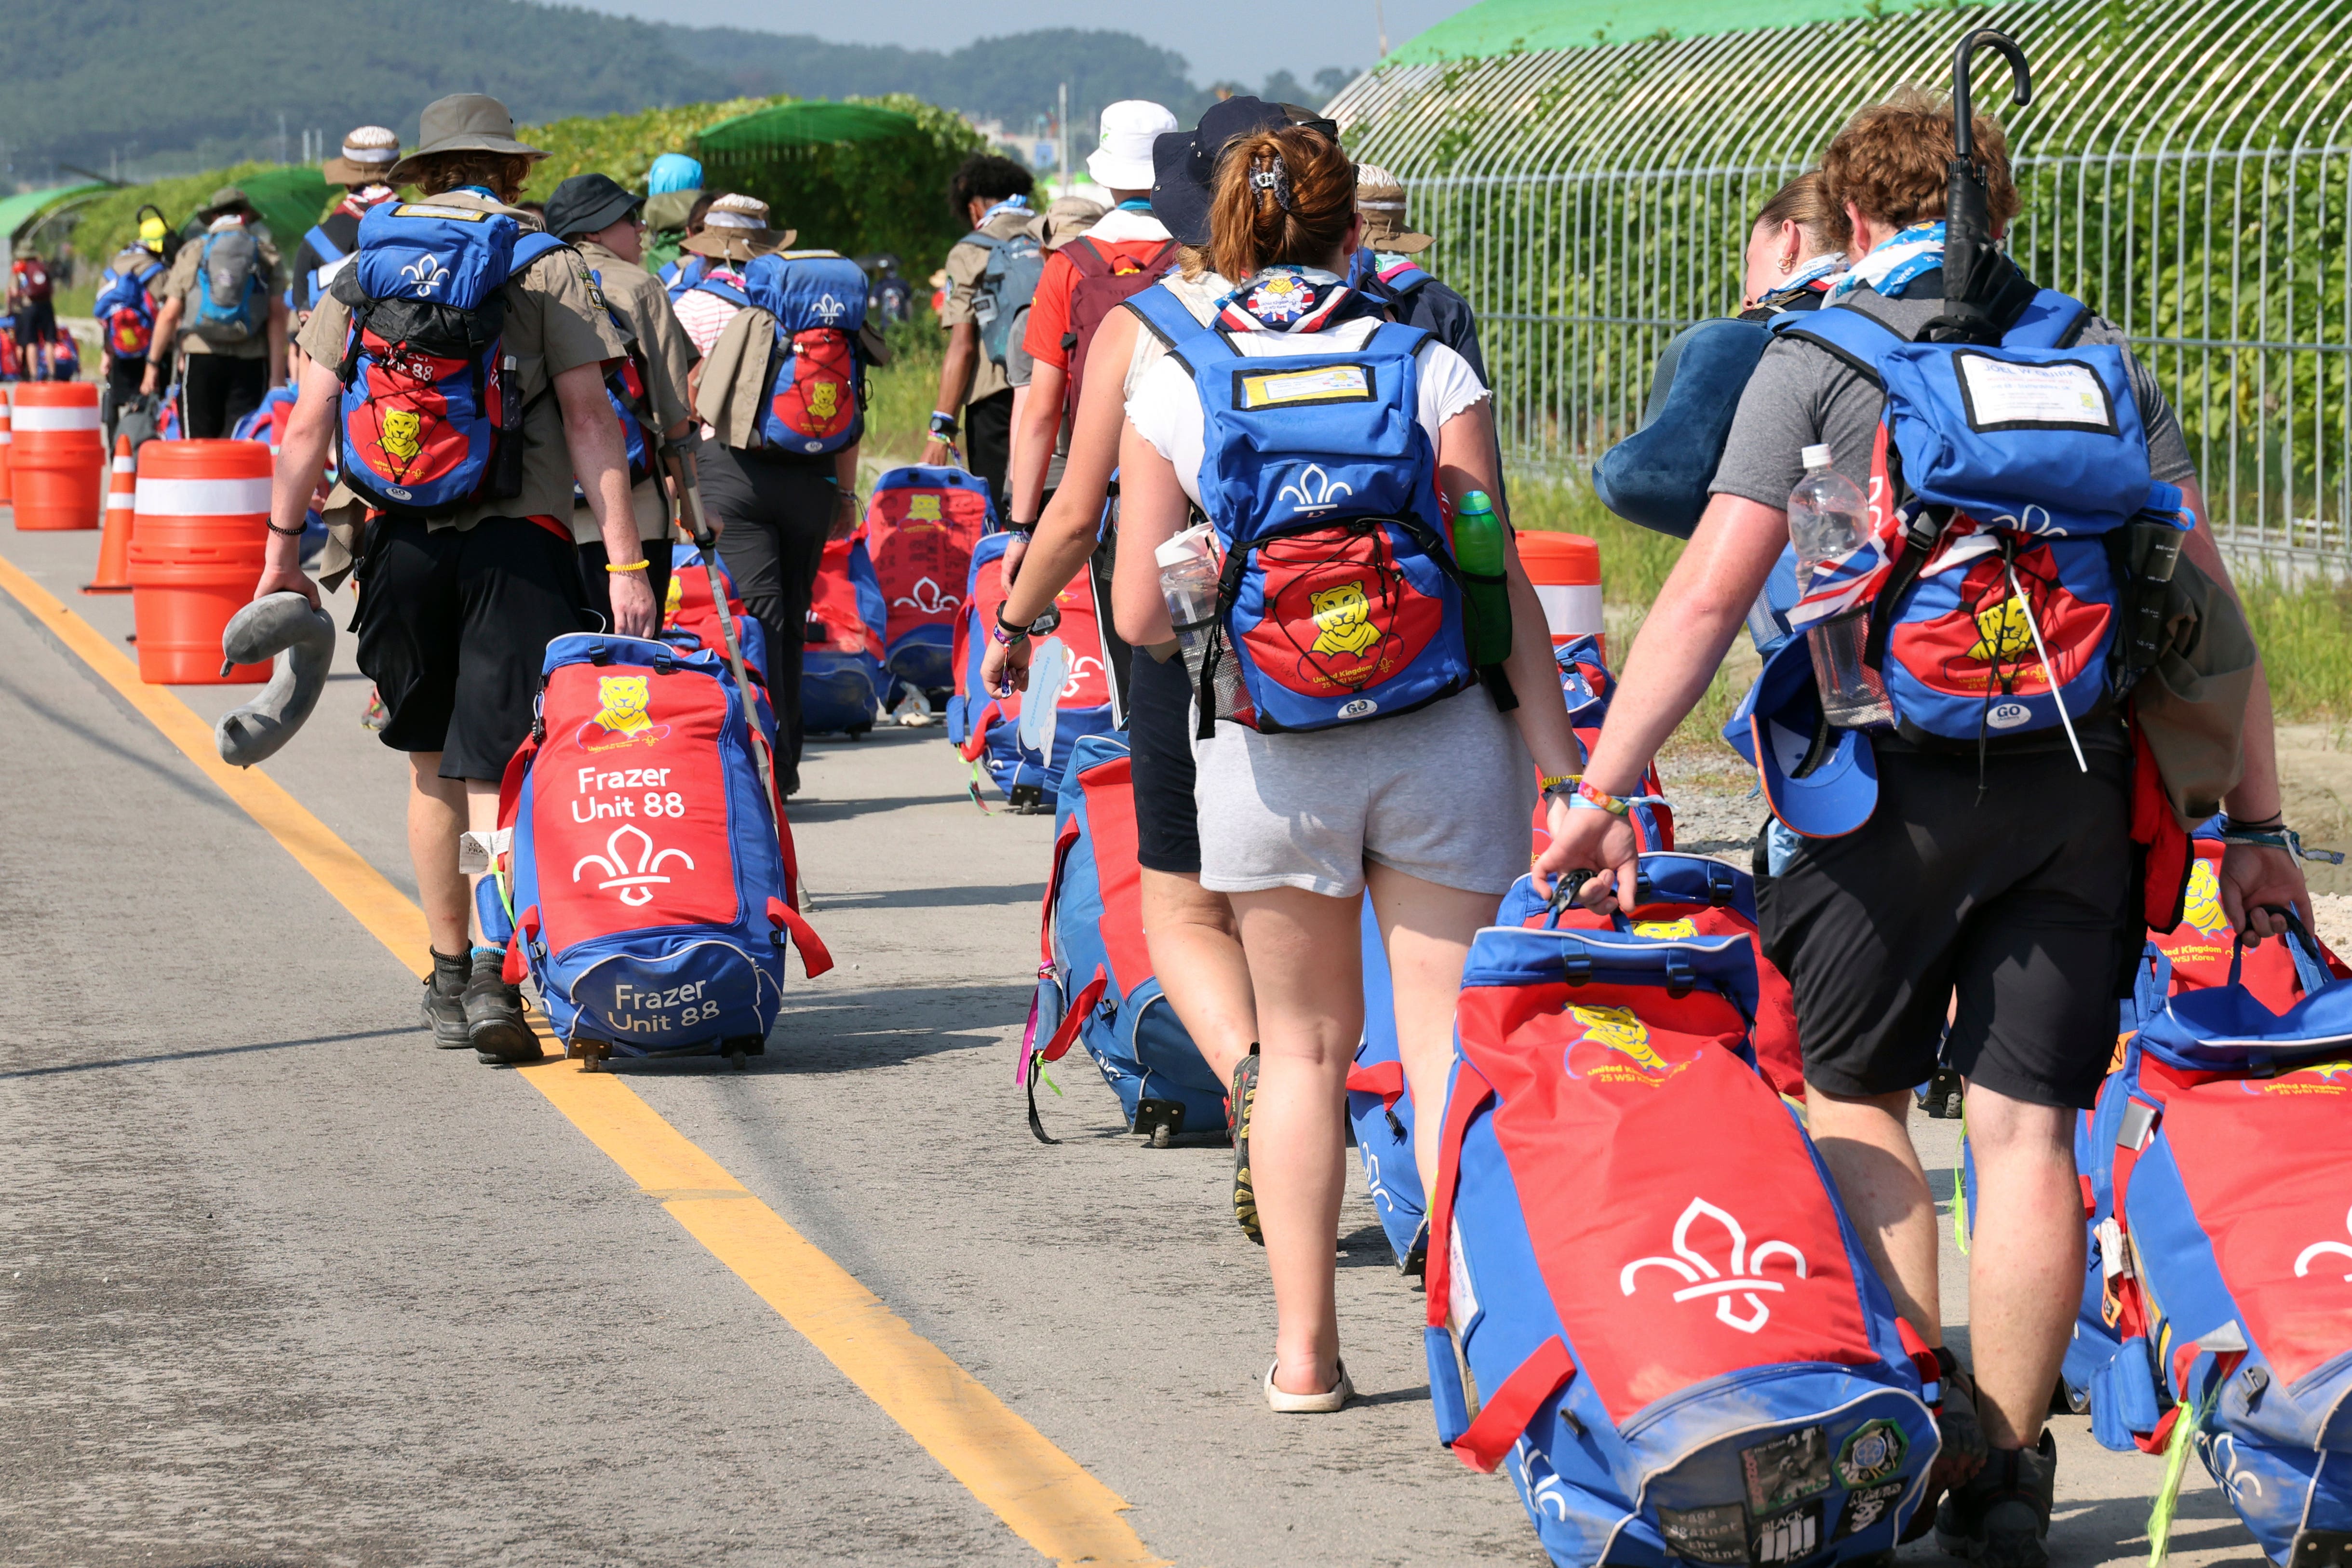 UK Scouts will face an impact on its activities for up to five years after spending £1 million evacuating youngsters from the world jamboree in South Korea amid a heatwave